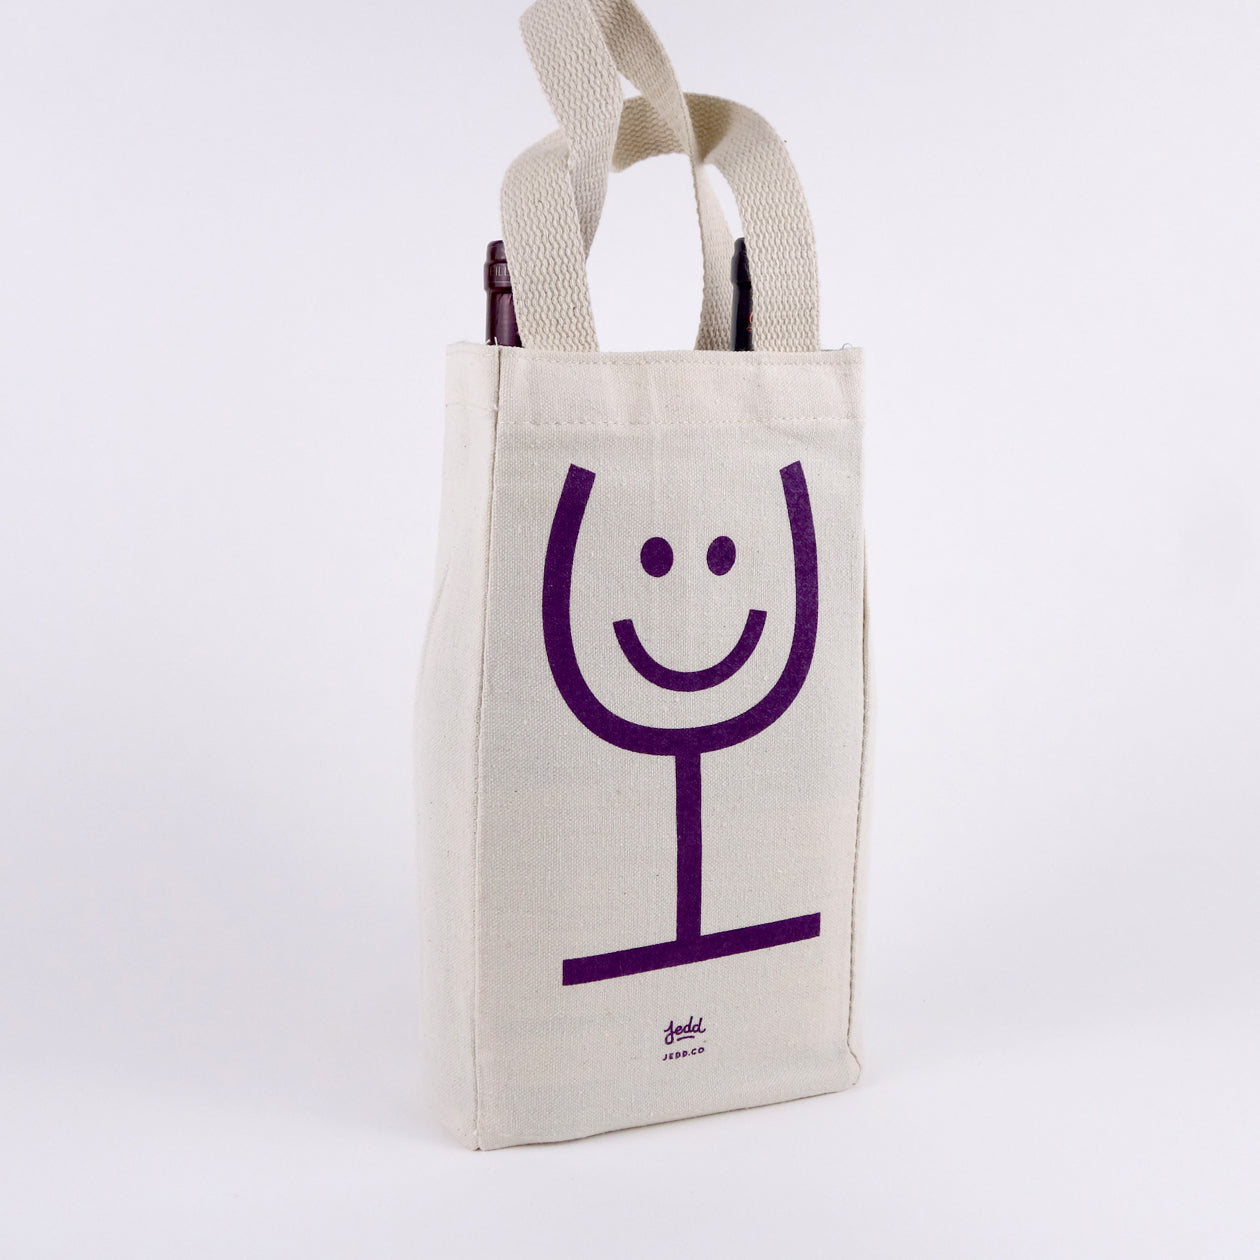 A canvas wine tote with a glass of wine smiley face illustration screen printed in purple.